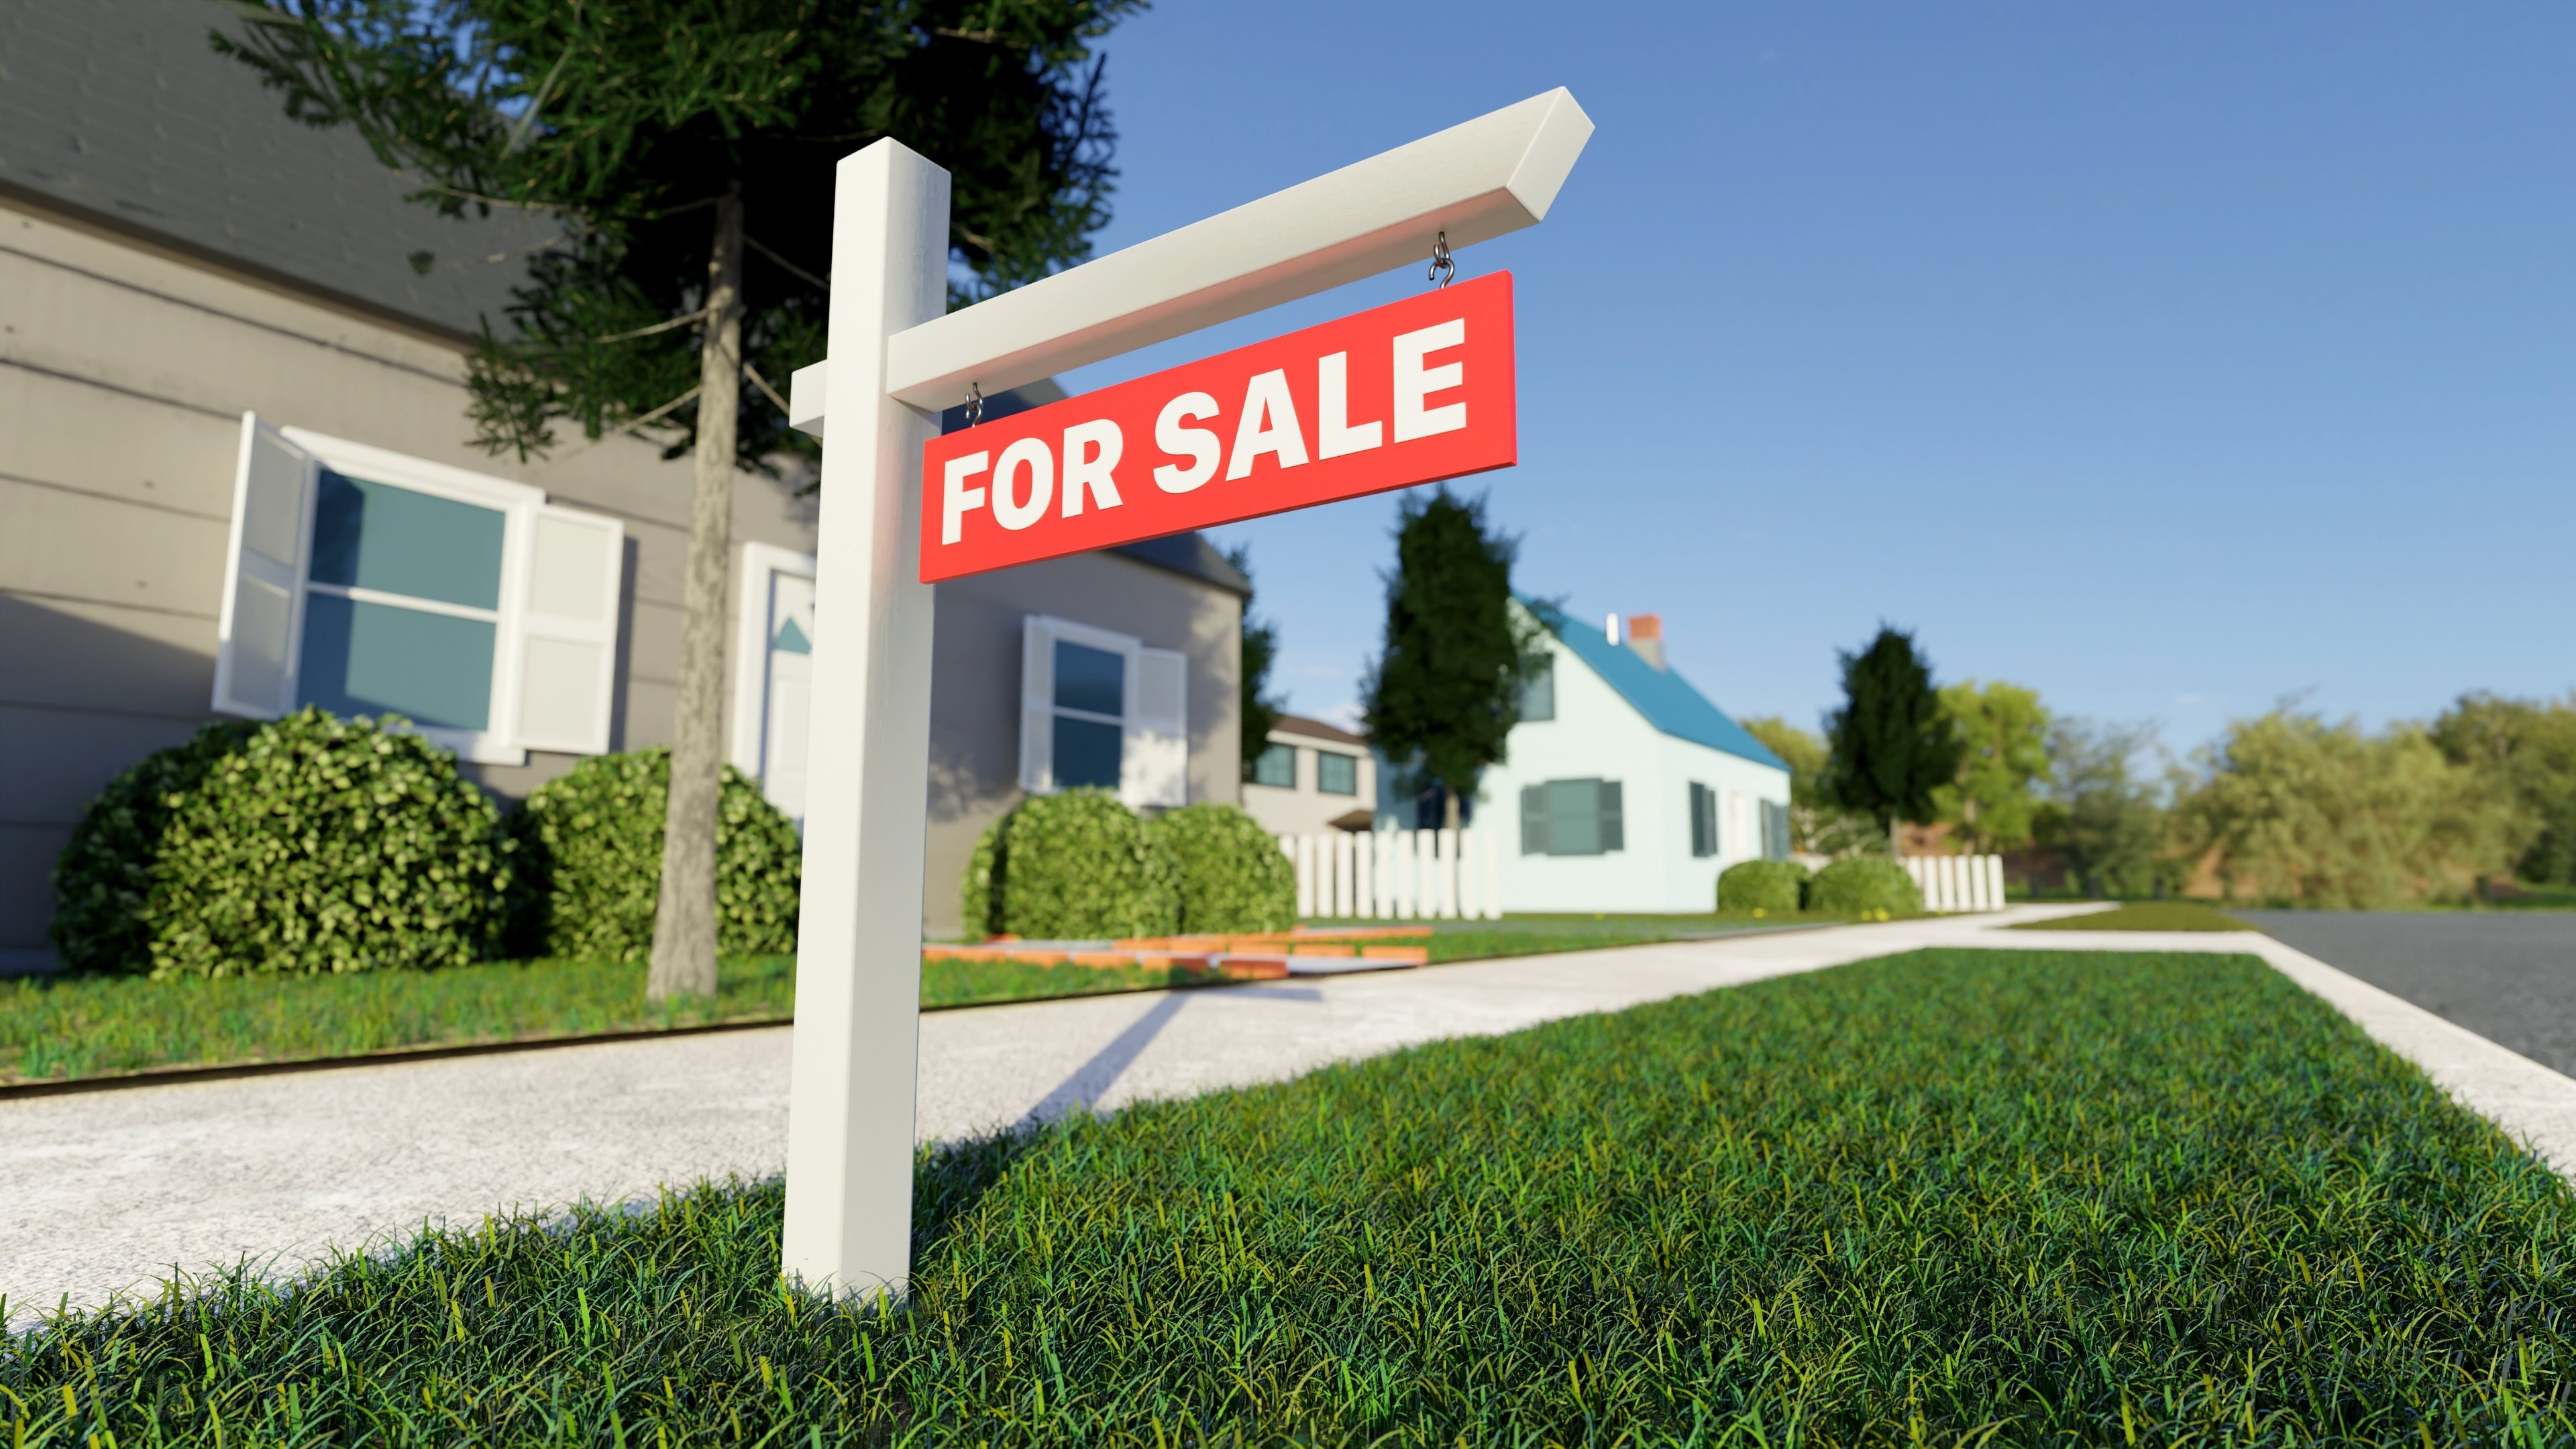 Real estate sign in front of a house for sale